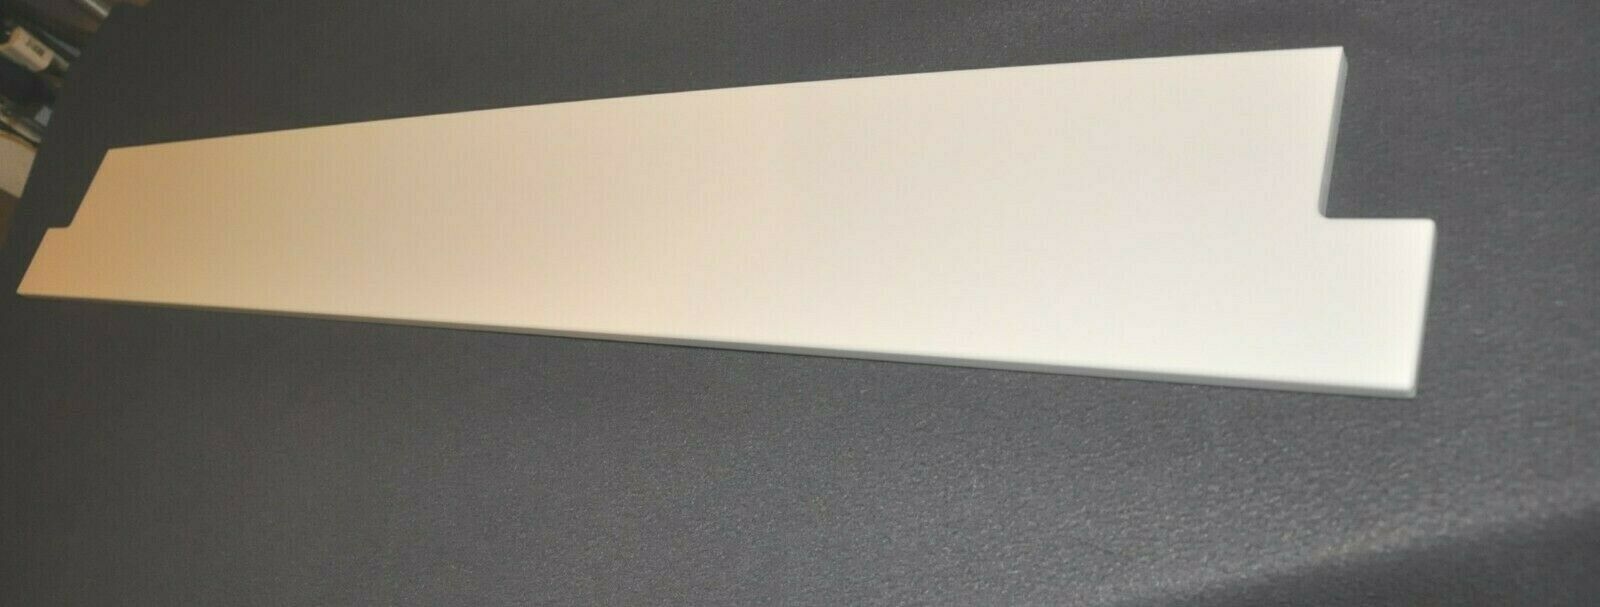 5 X 39  Custom Corian Bright White Replacement Window Sill Houze Wood Products